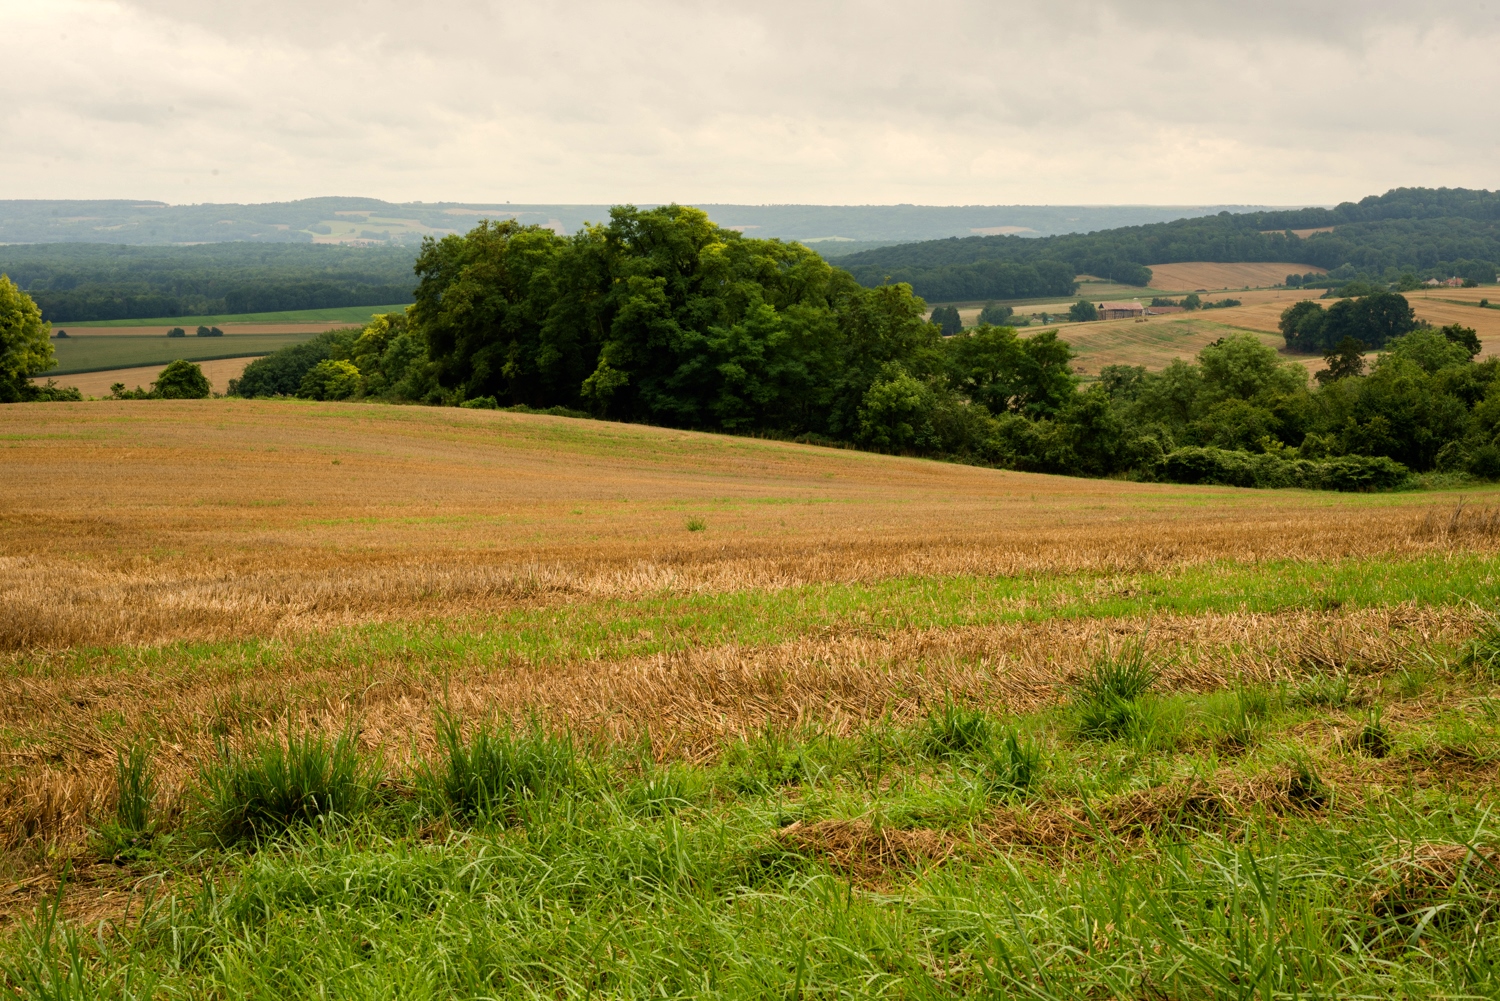 Fields at Chemin des Dames.